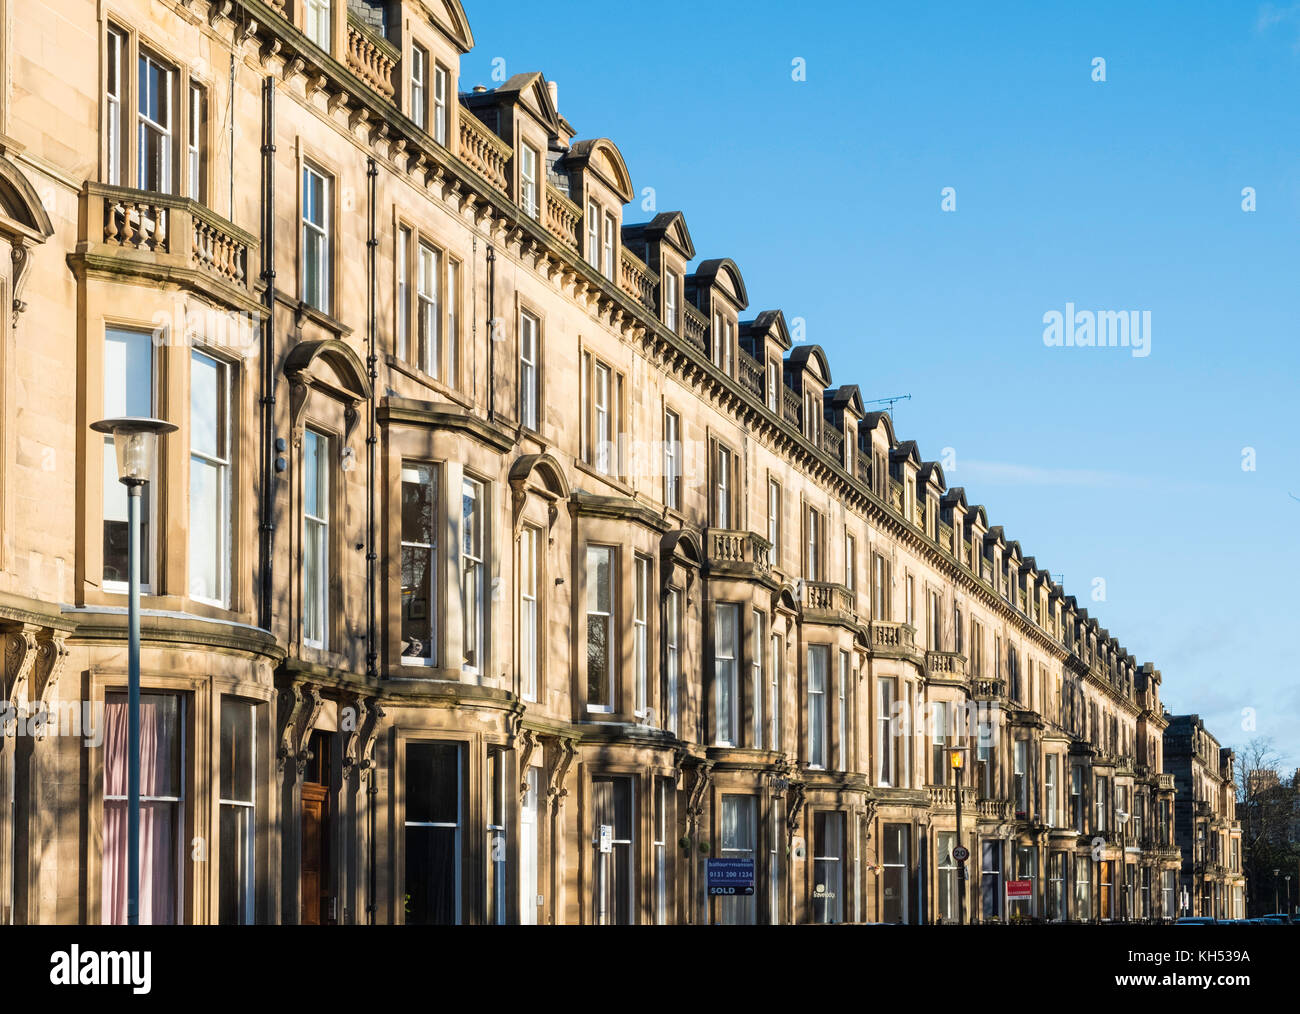 View of row of sandstone terraced apartments (tenements) on Learmonth Terrace in Edinburgh, Scotland, United Kingdom Stock Photo